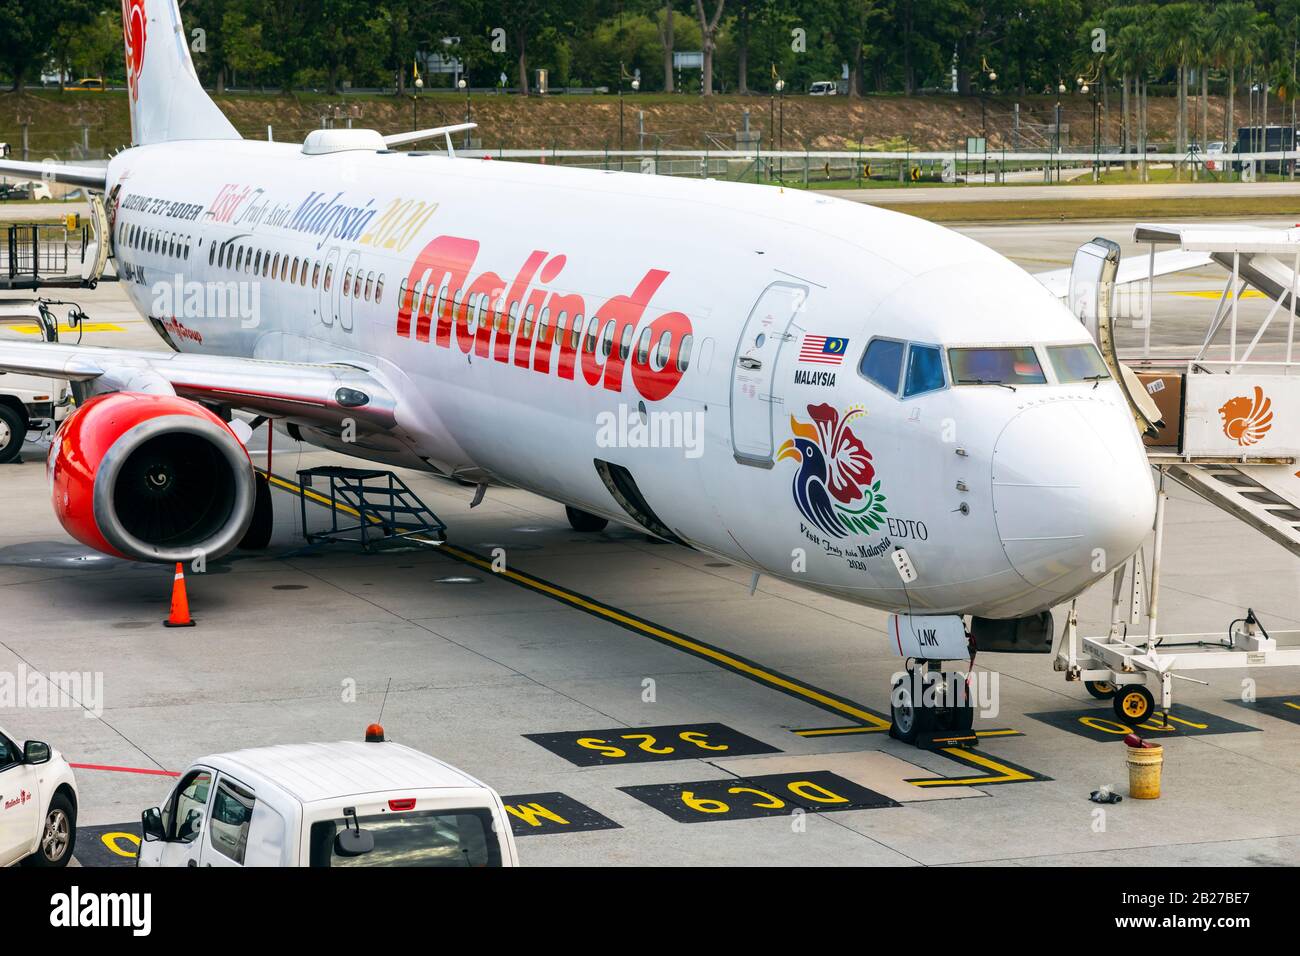 Malindo Boeing 737-900Er plane with two CFMI engines, being refuelled and loaded at Kuala Lumpur airport, Malaysia, Asia Stock Photo